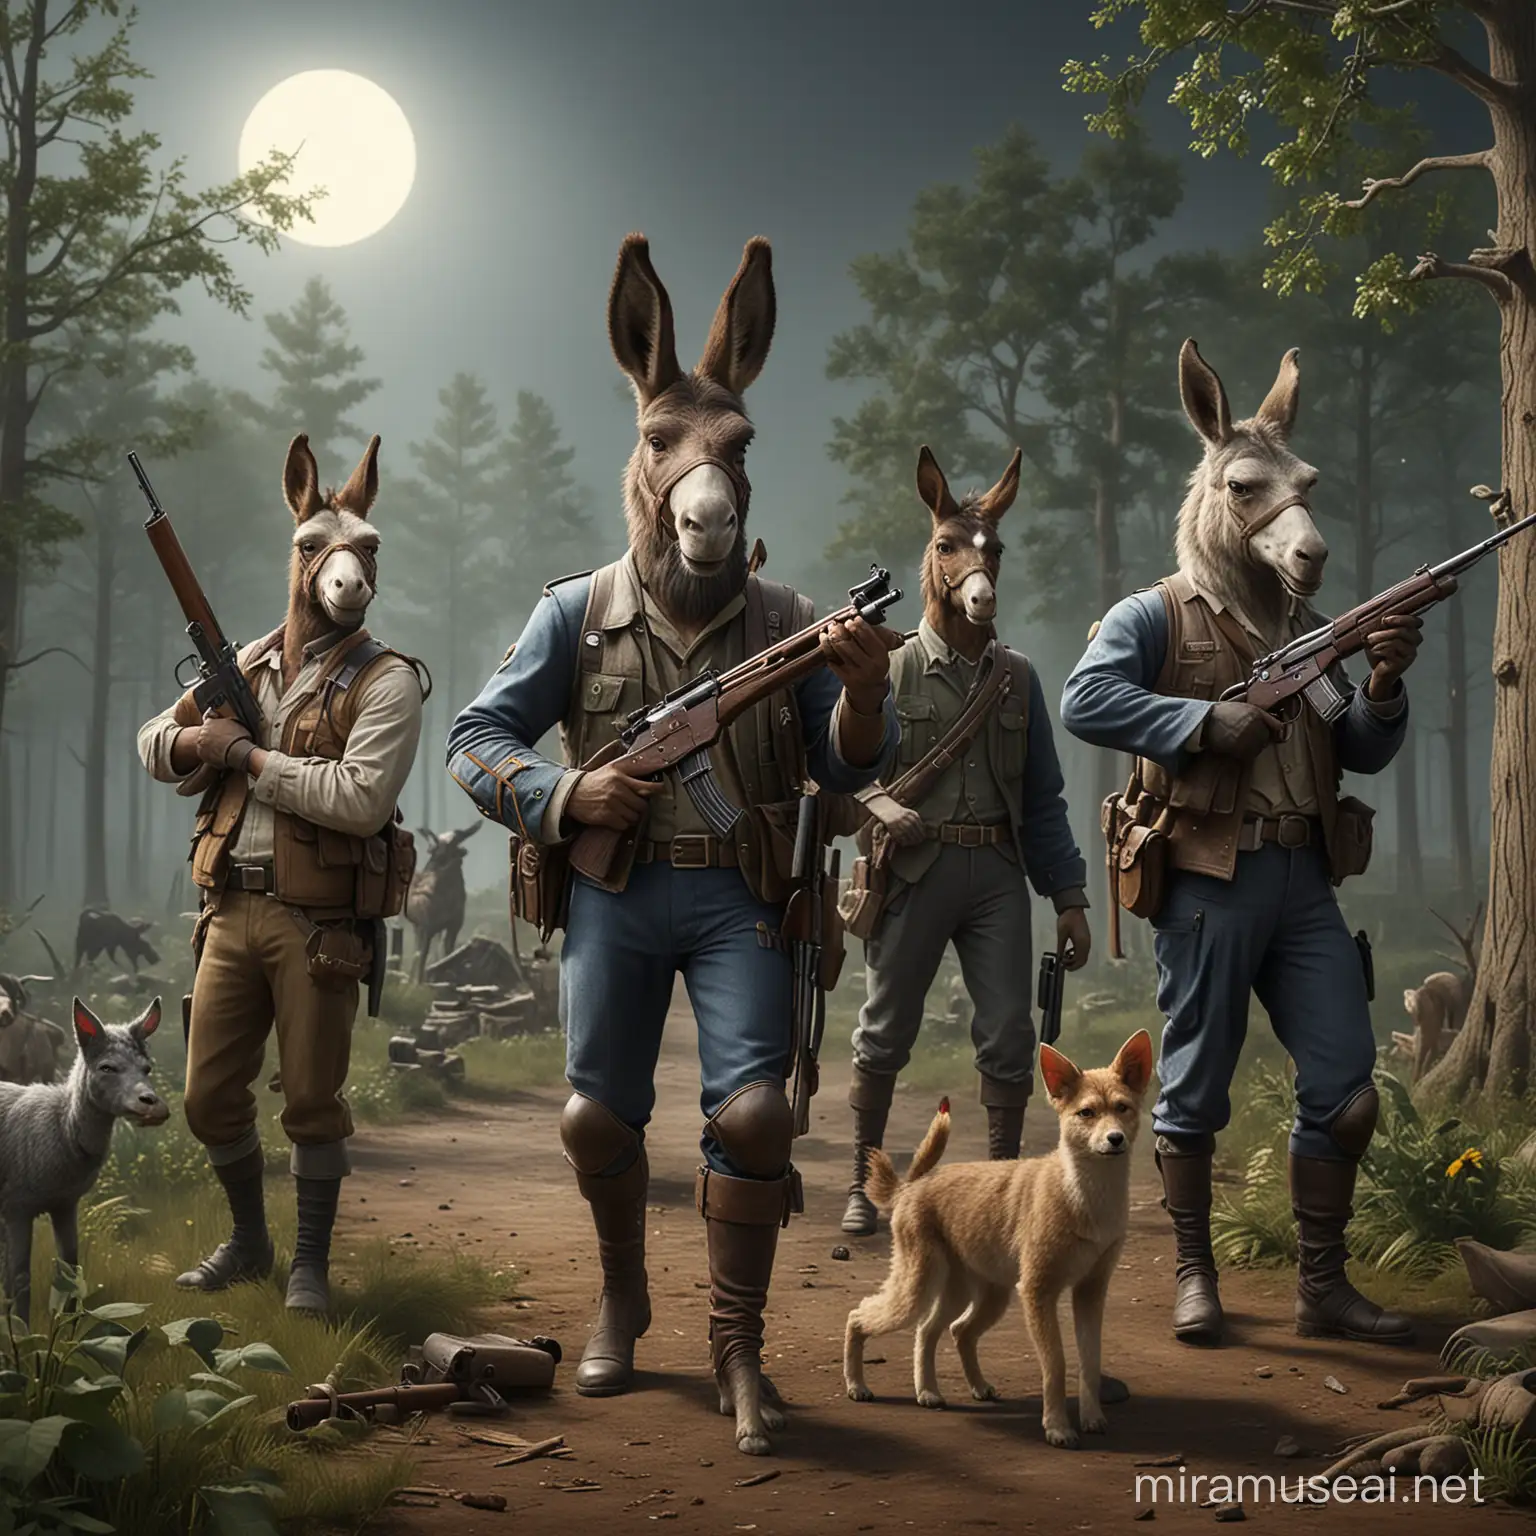 Create a photorealistic image of the Bremen Town Musicians with guns. The donkey should be holding a shotgun, the dog should be holding a pistol, the cat should be holding a machine gun, and the rooster should be holding a grenade launcher. The animals should be standing in a forest clearing, and there should be a full moon in the background.